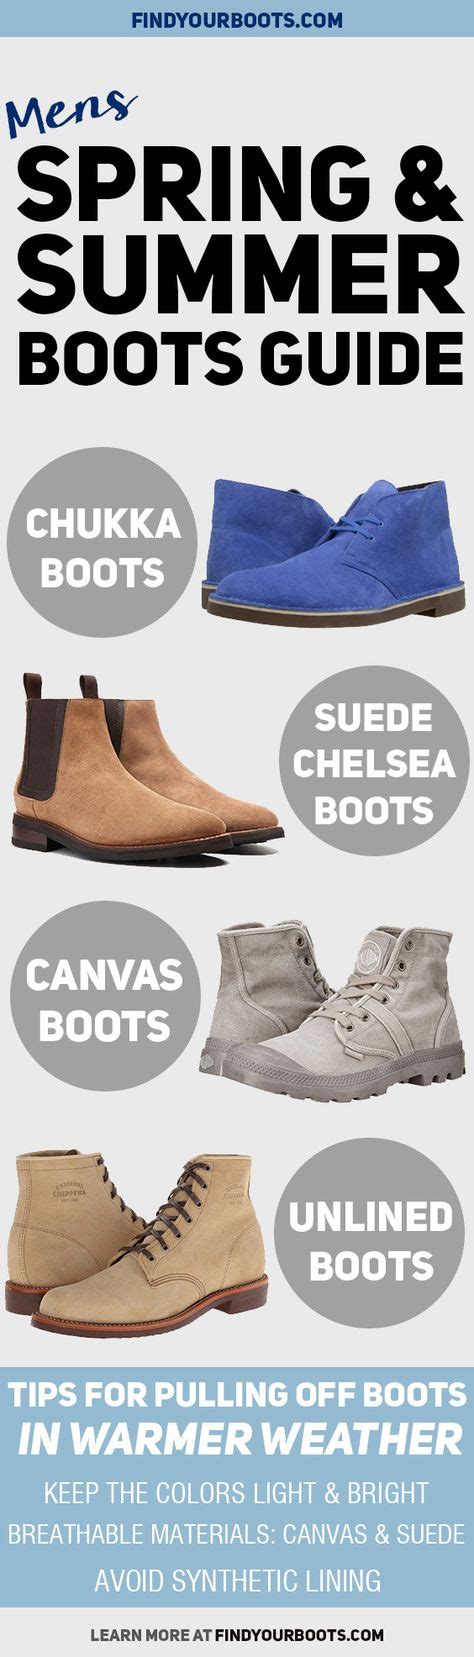 9 Ultimate Guide To Mens Boots Ideas Boots Boots Men Fashion Boots